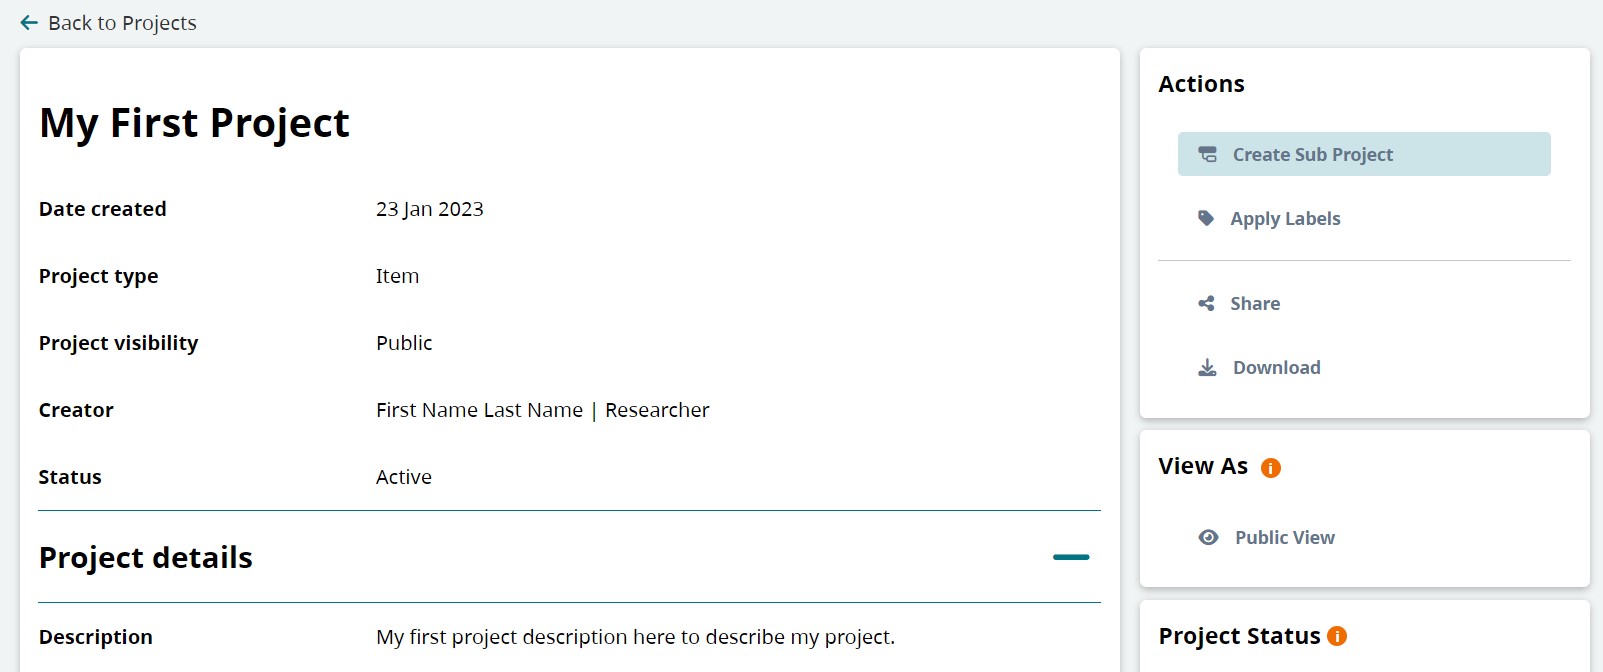 Screenshot of the Local Contexts Hub Project page for My First Project. In the Project Actions menu, “Create Sub Project” is highlighted.